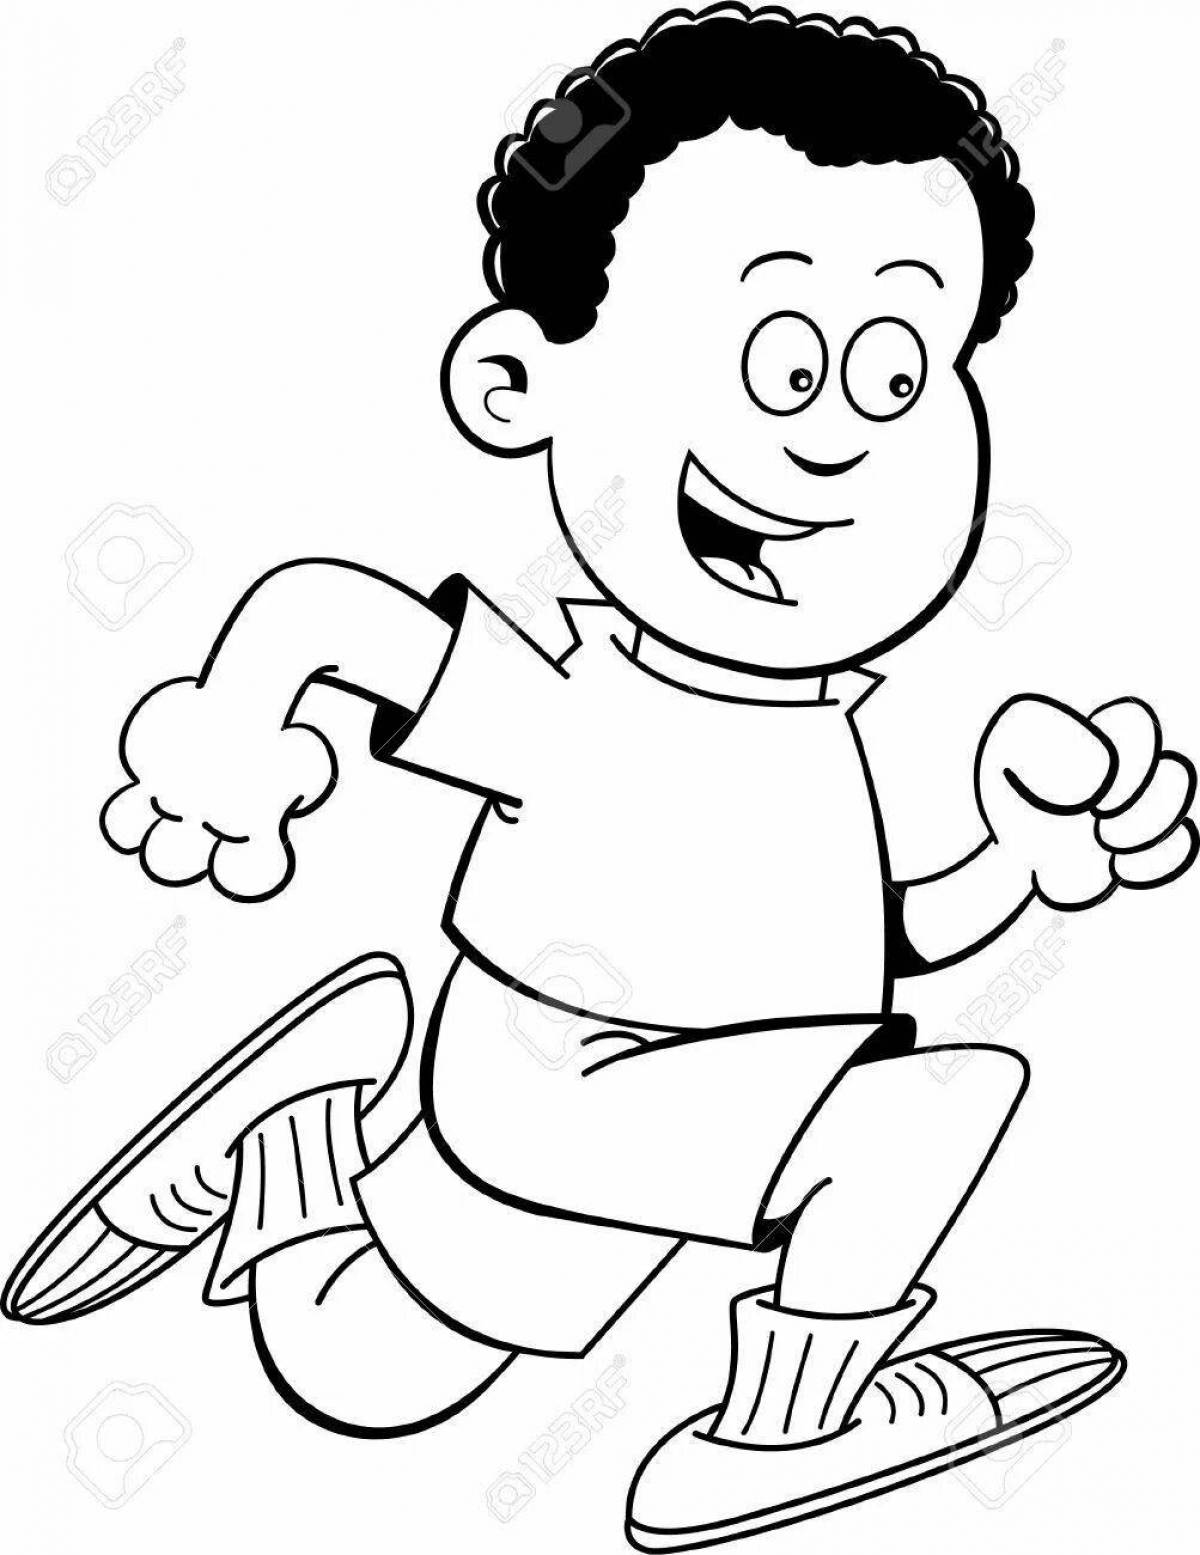 Coloring page cheerful running boy